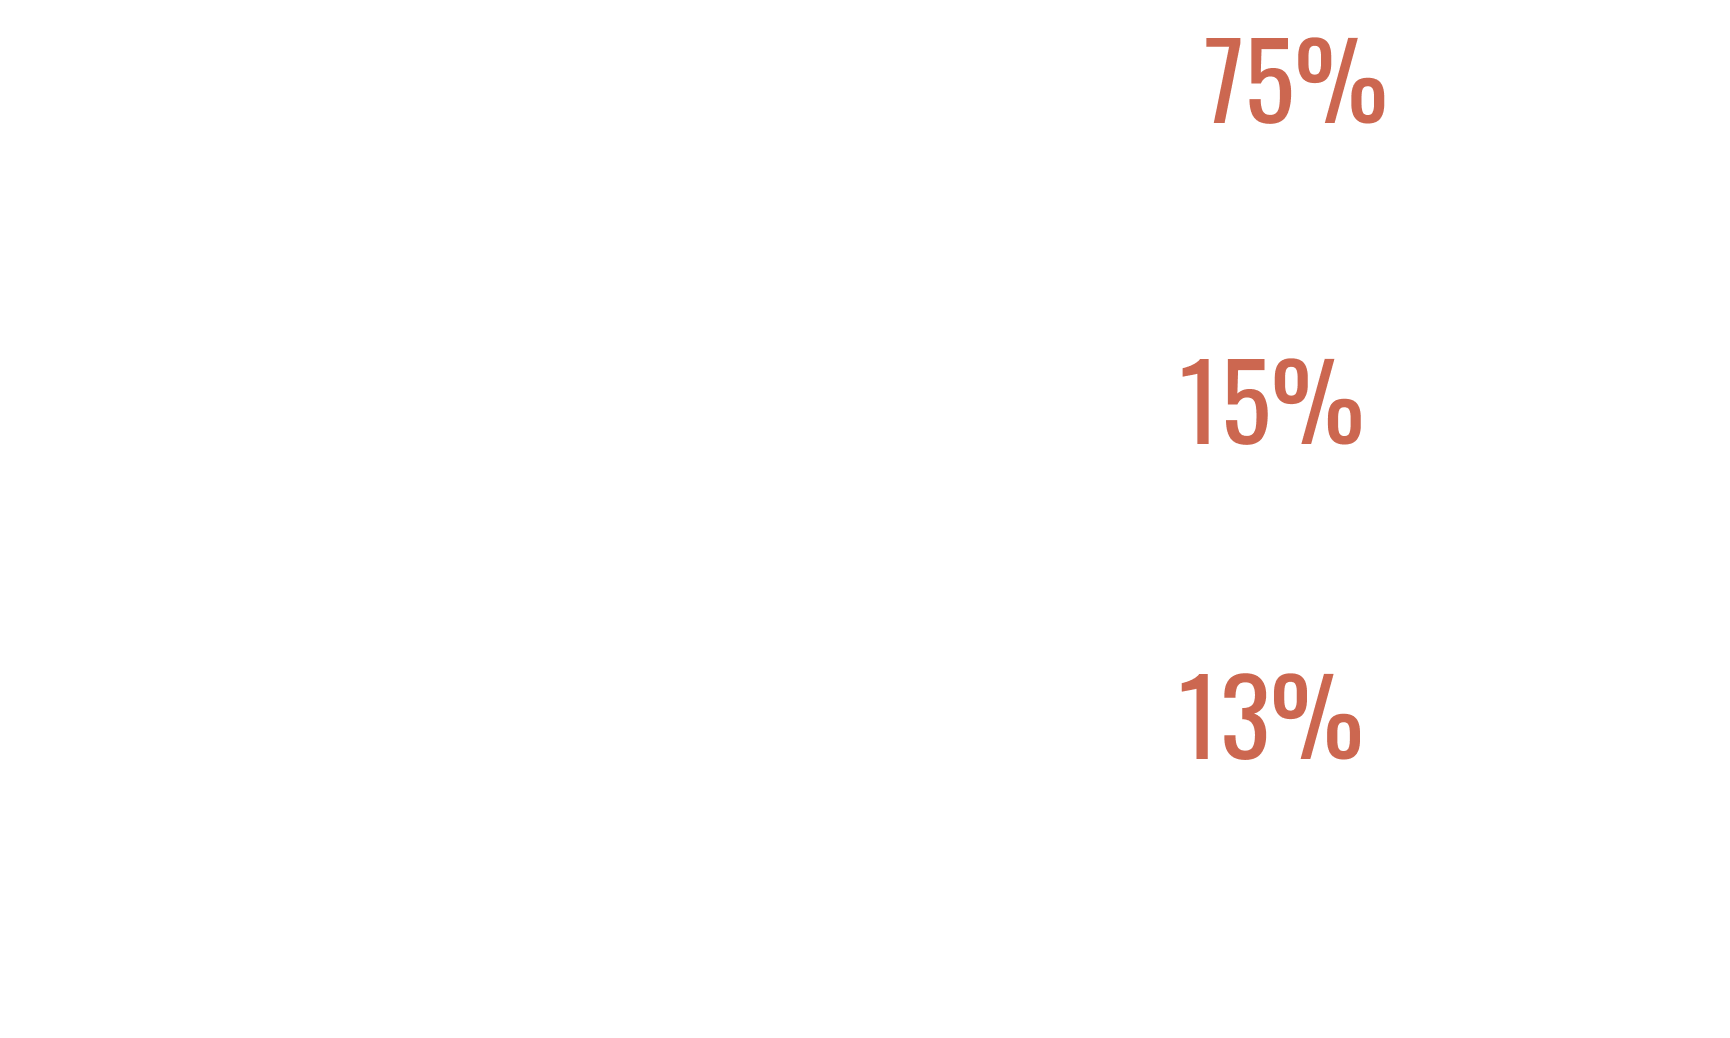 75% identify as Cisgender Woman, 15% idendity as Cisgender Man, and 13% identify as Trans, Non-binary, Gender non-conforming, and/other